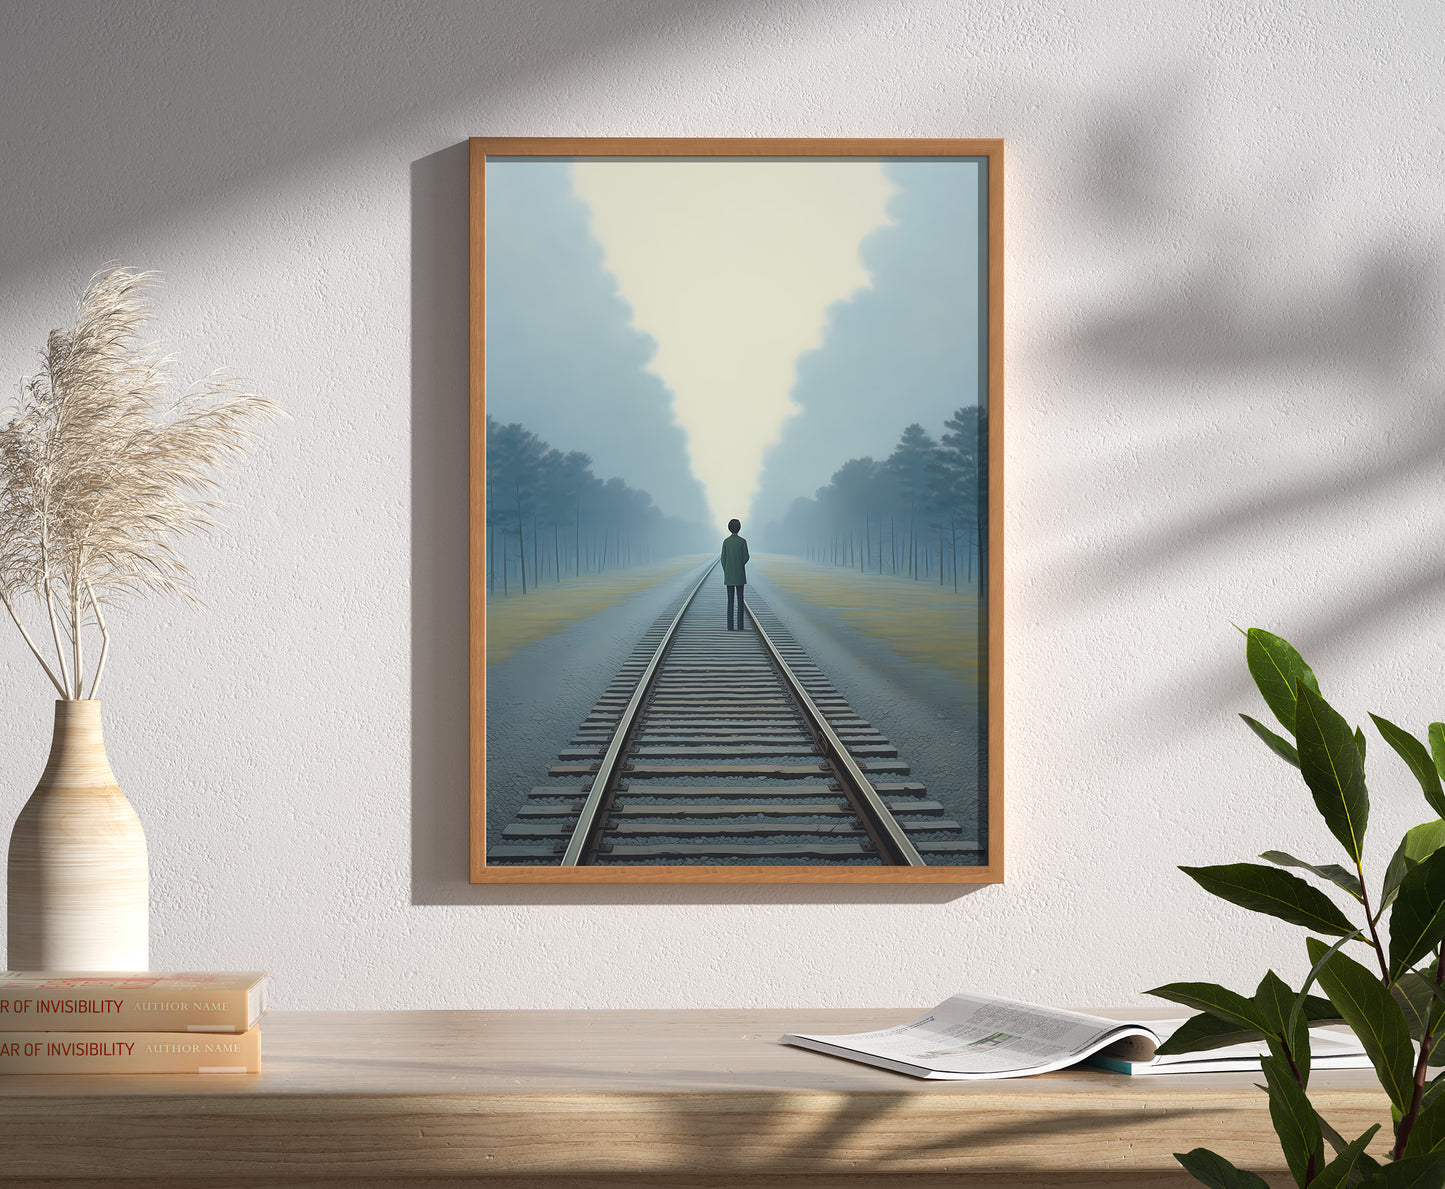 A framed painting on a wall depicting a person on train tracks leading into the horizon.